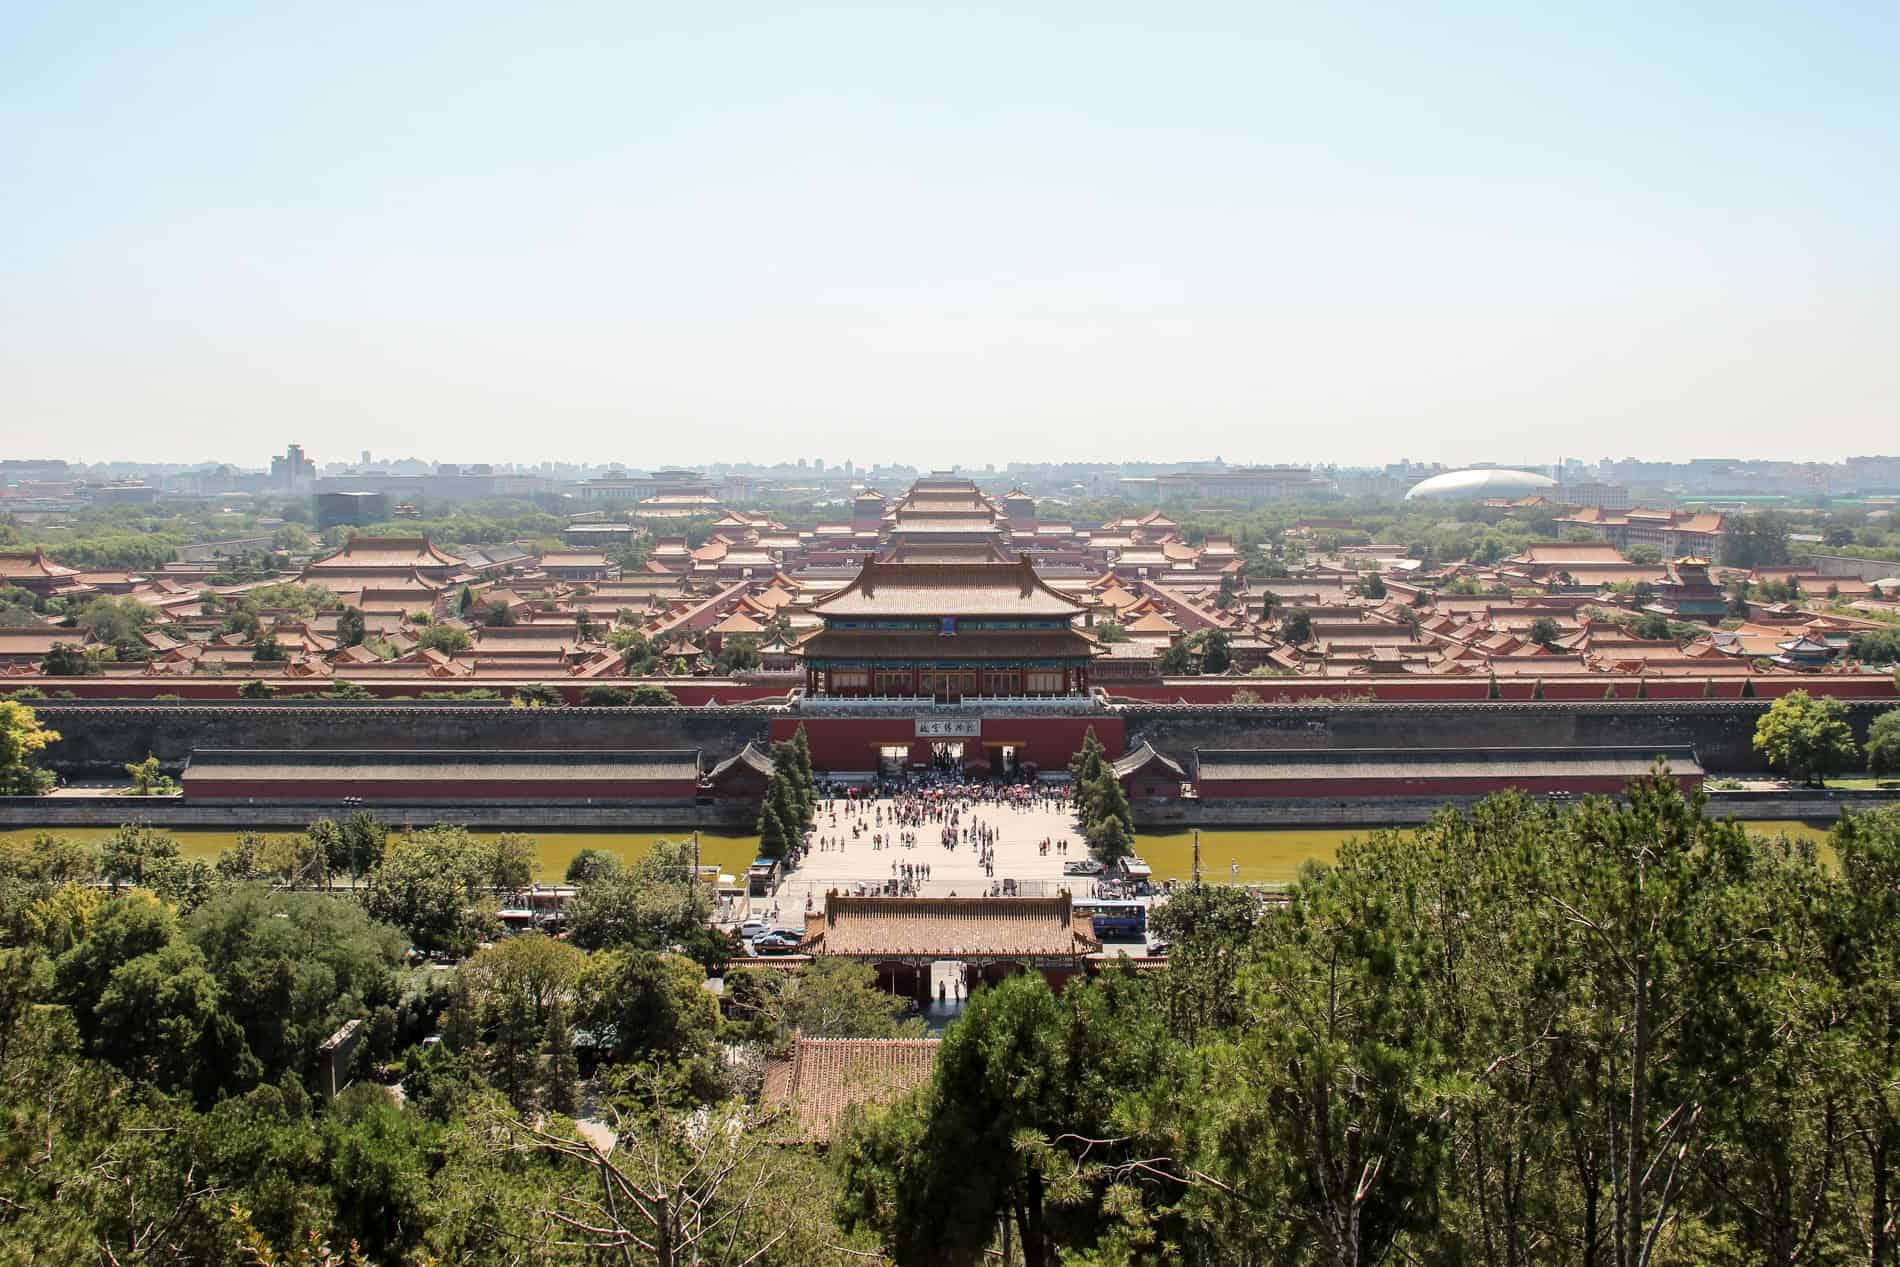 Elevated view of the imperial palace complex of the Forbidden City in China, with people gathered in the open square. 